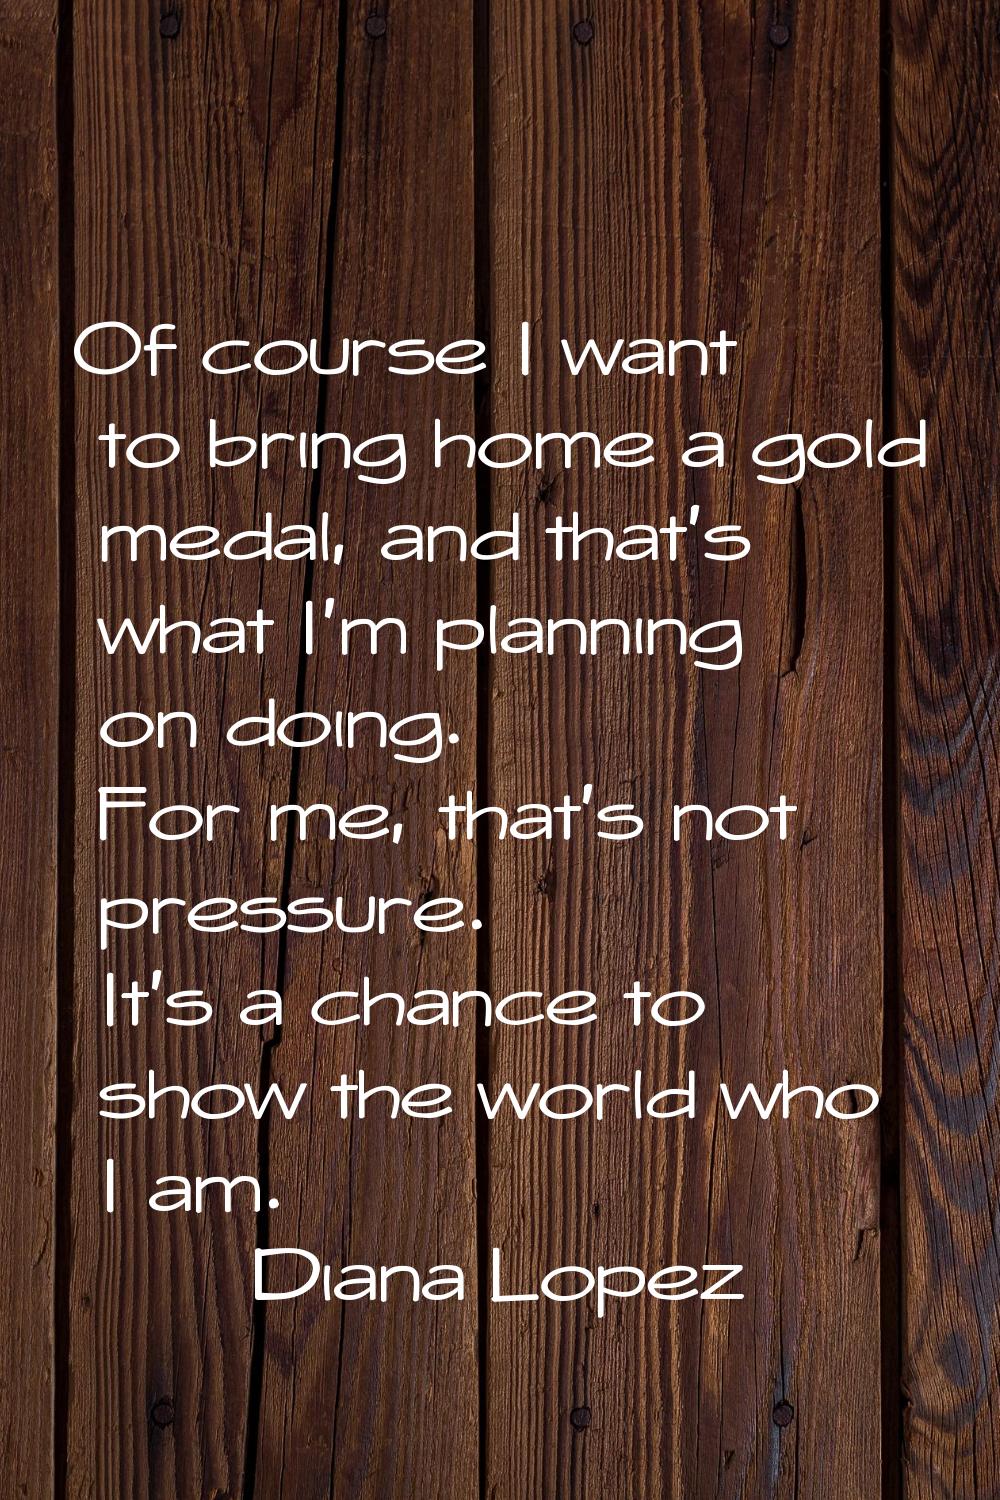 Of course I want to bring home a gold medal, and that's what I'm planning on doing. For me, that's 